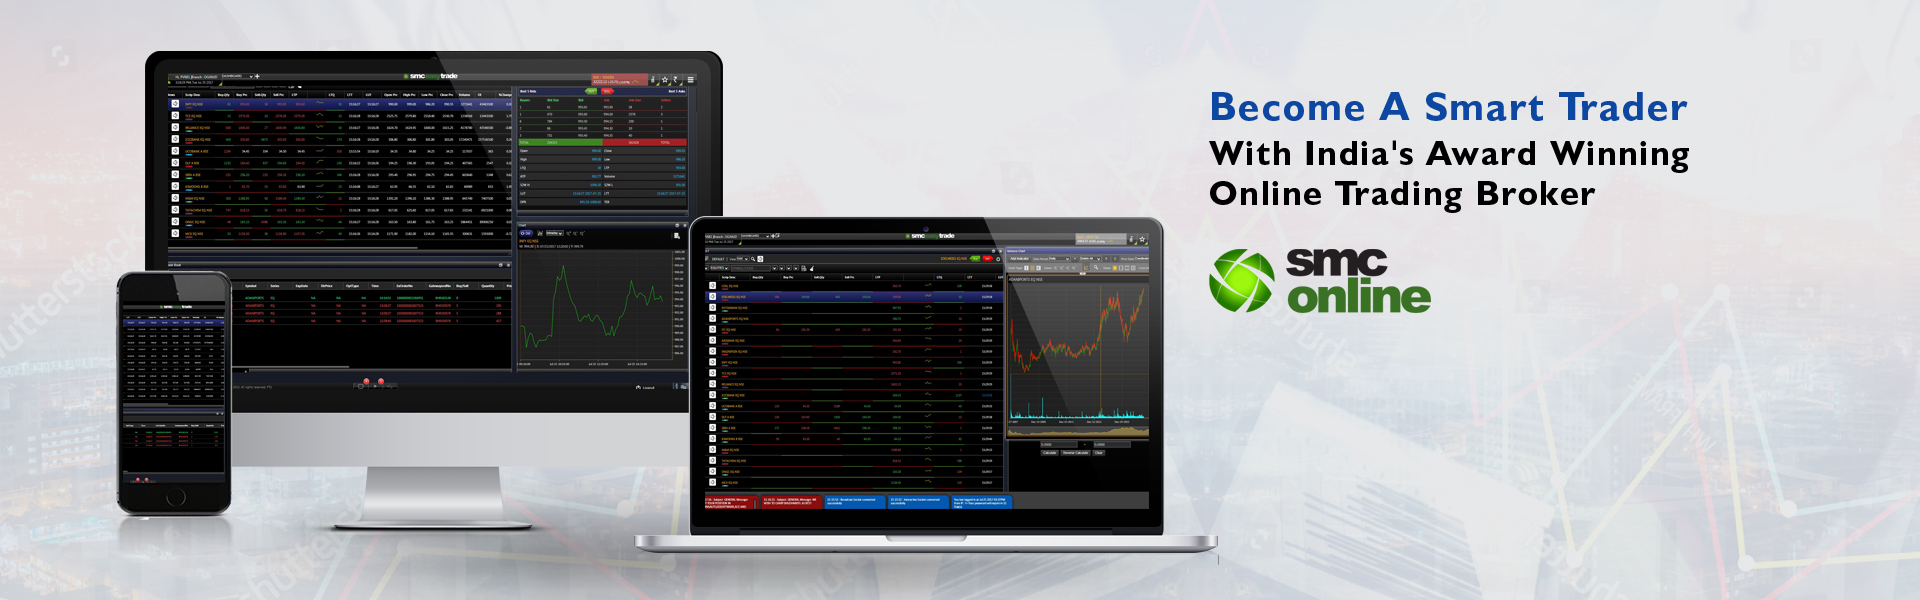 smc global securities mobile trading forex